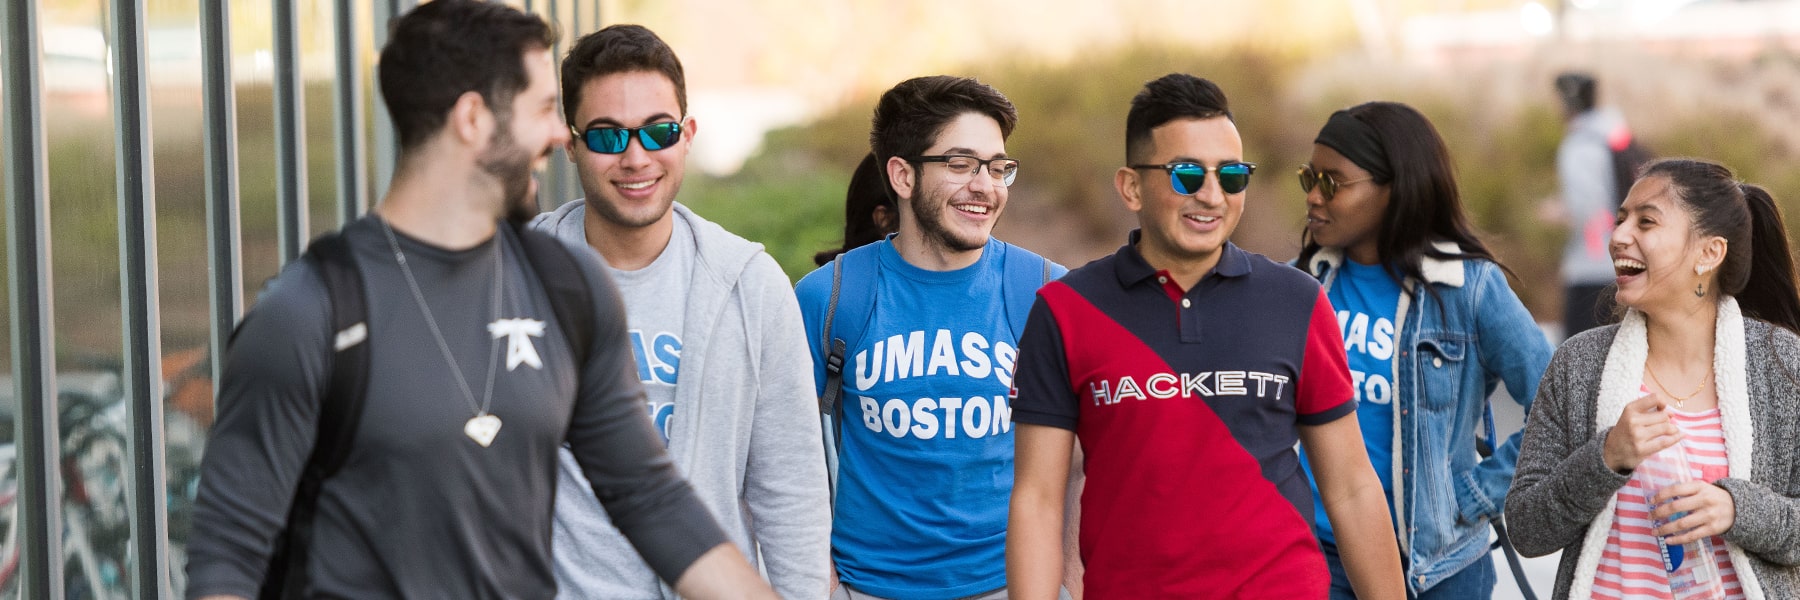 Group of diverse students walking laughing